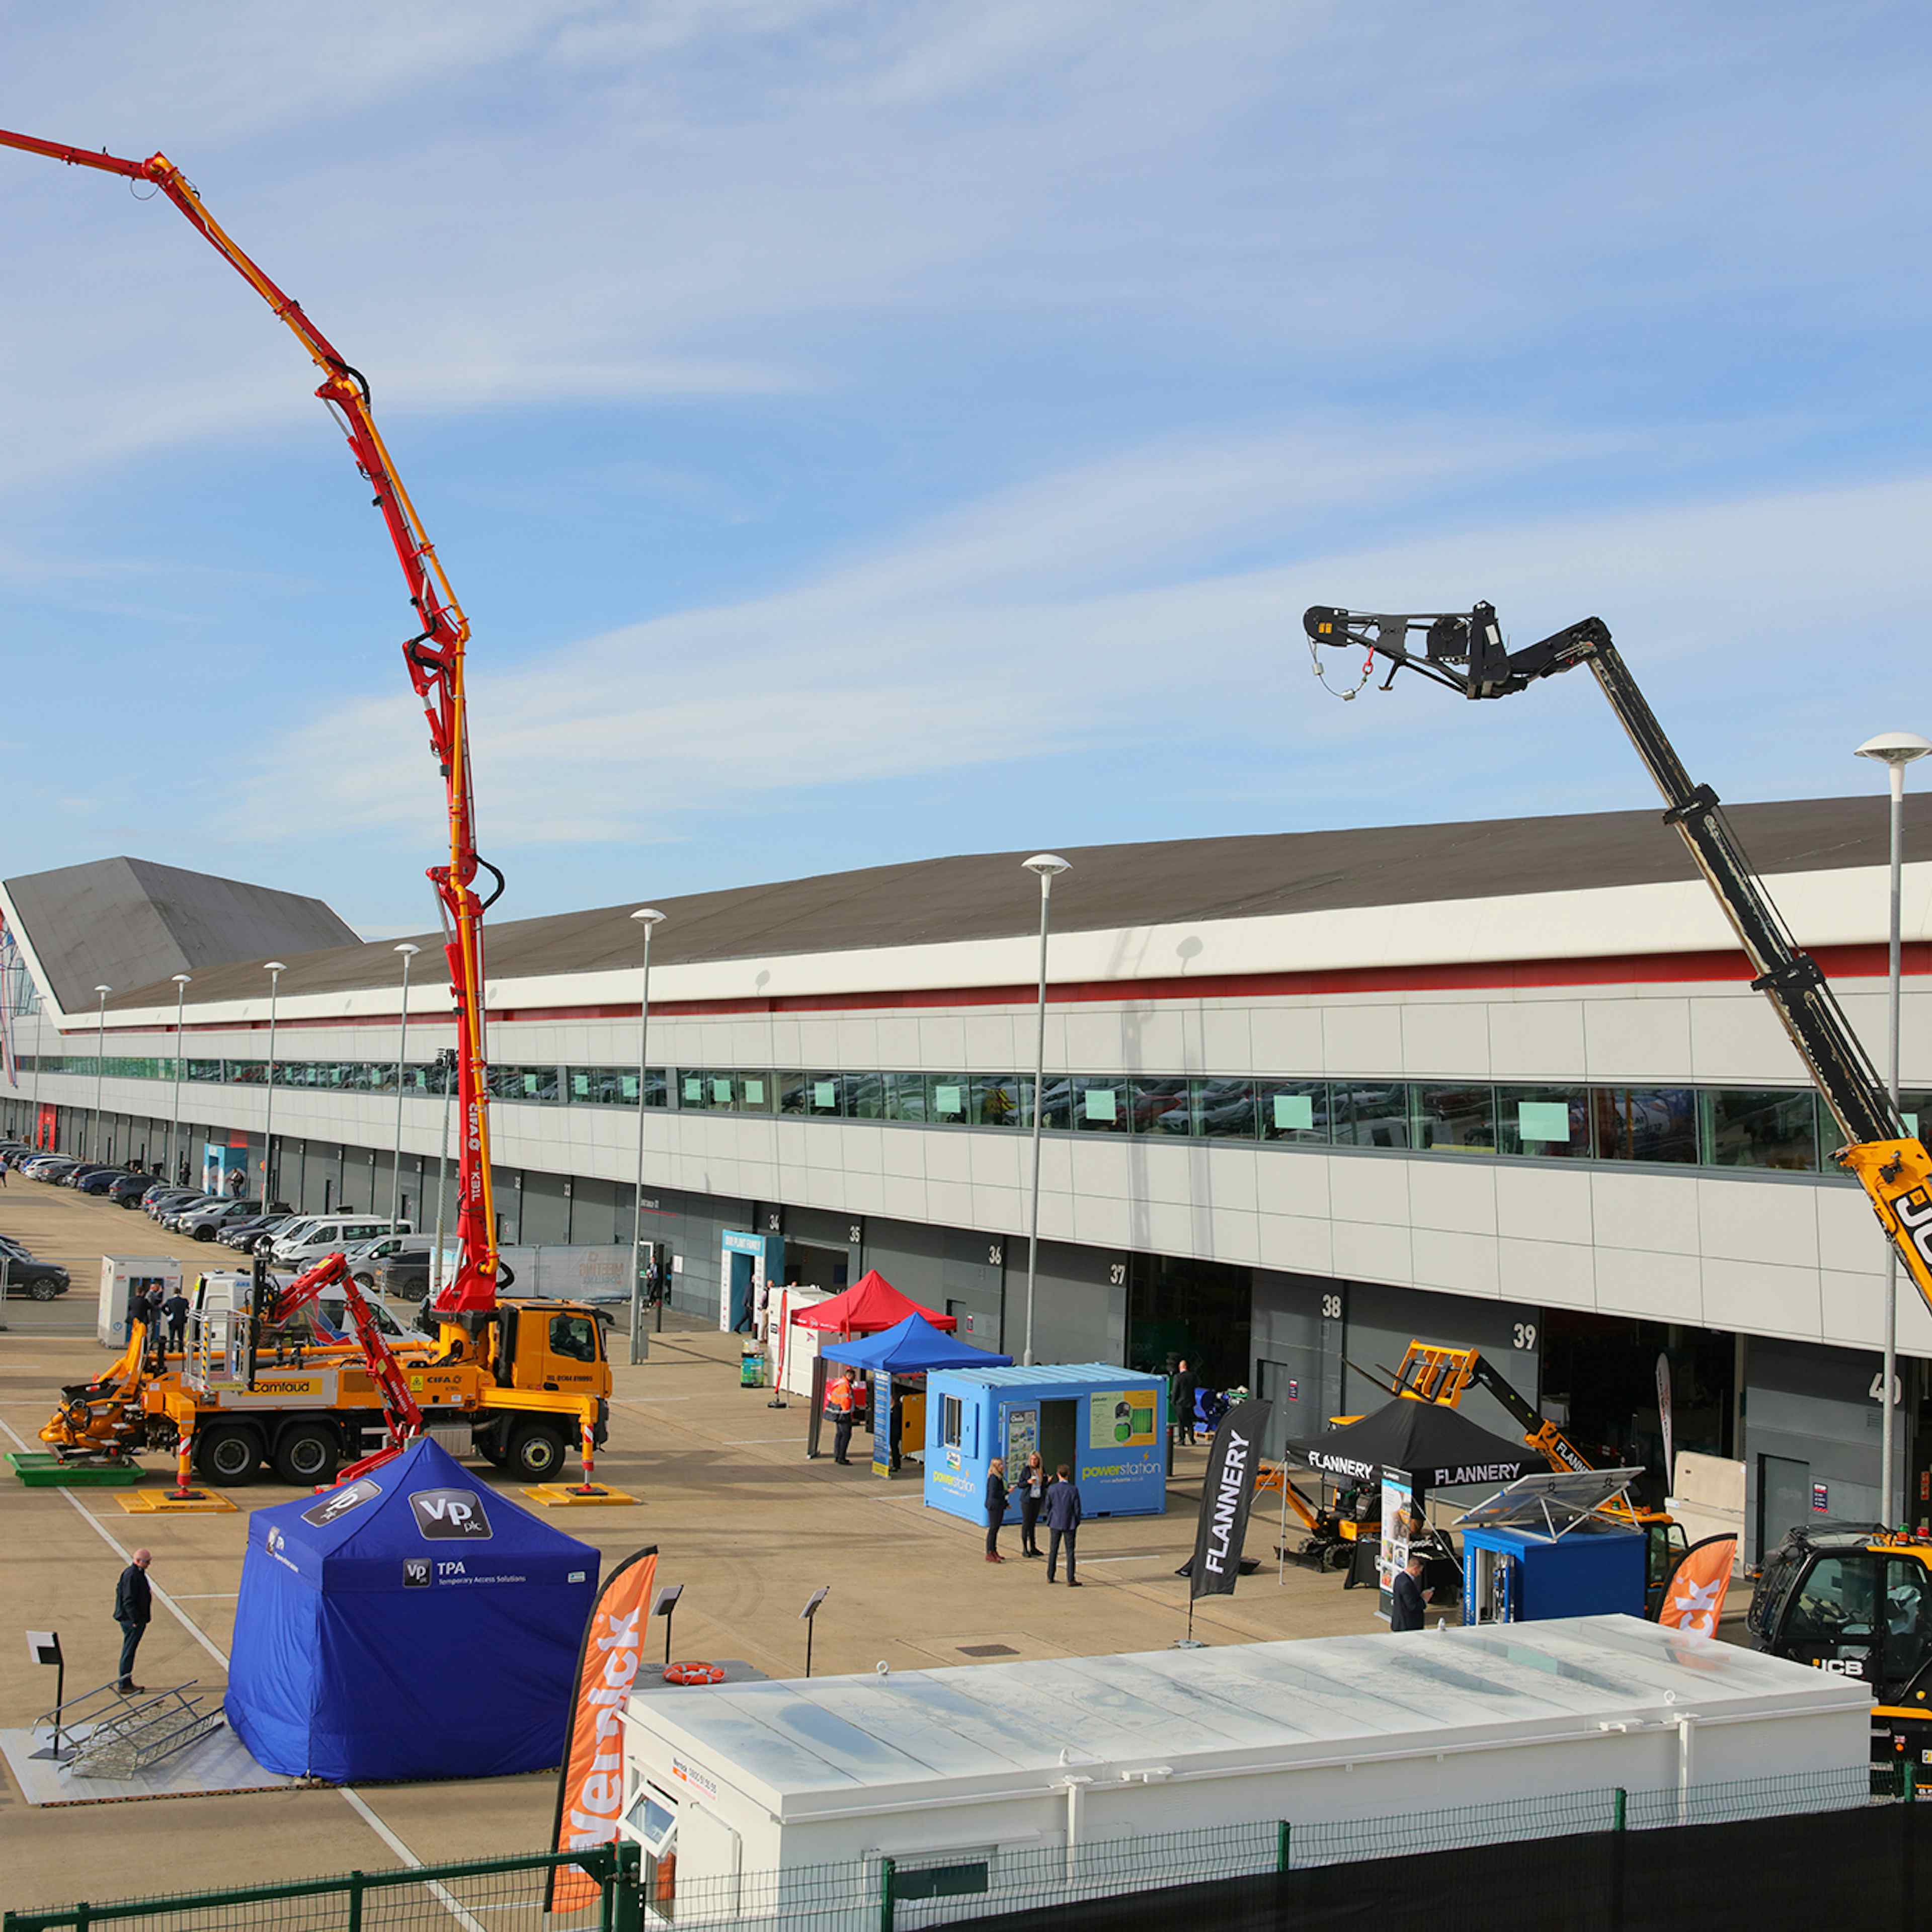 Silverstone International Conference & Exhibition Centre - image 2